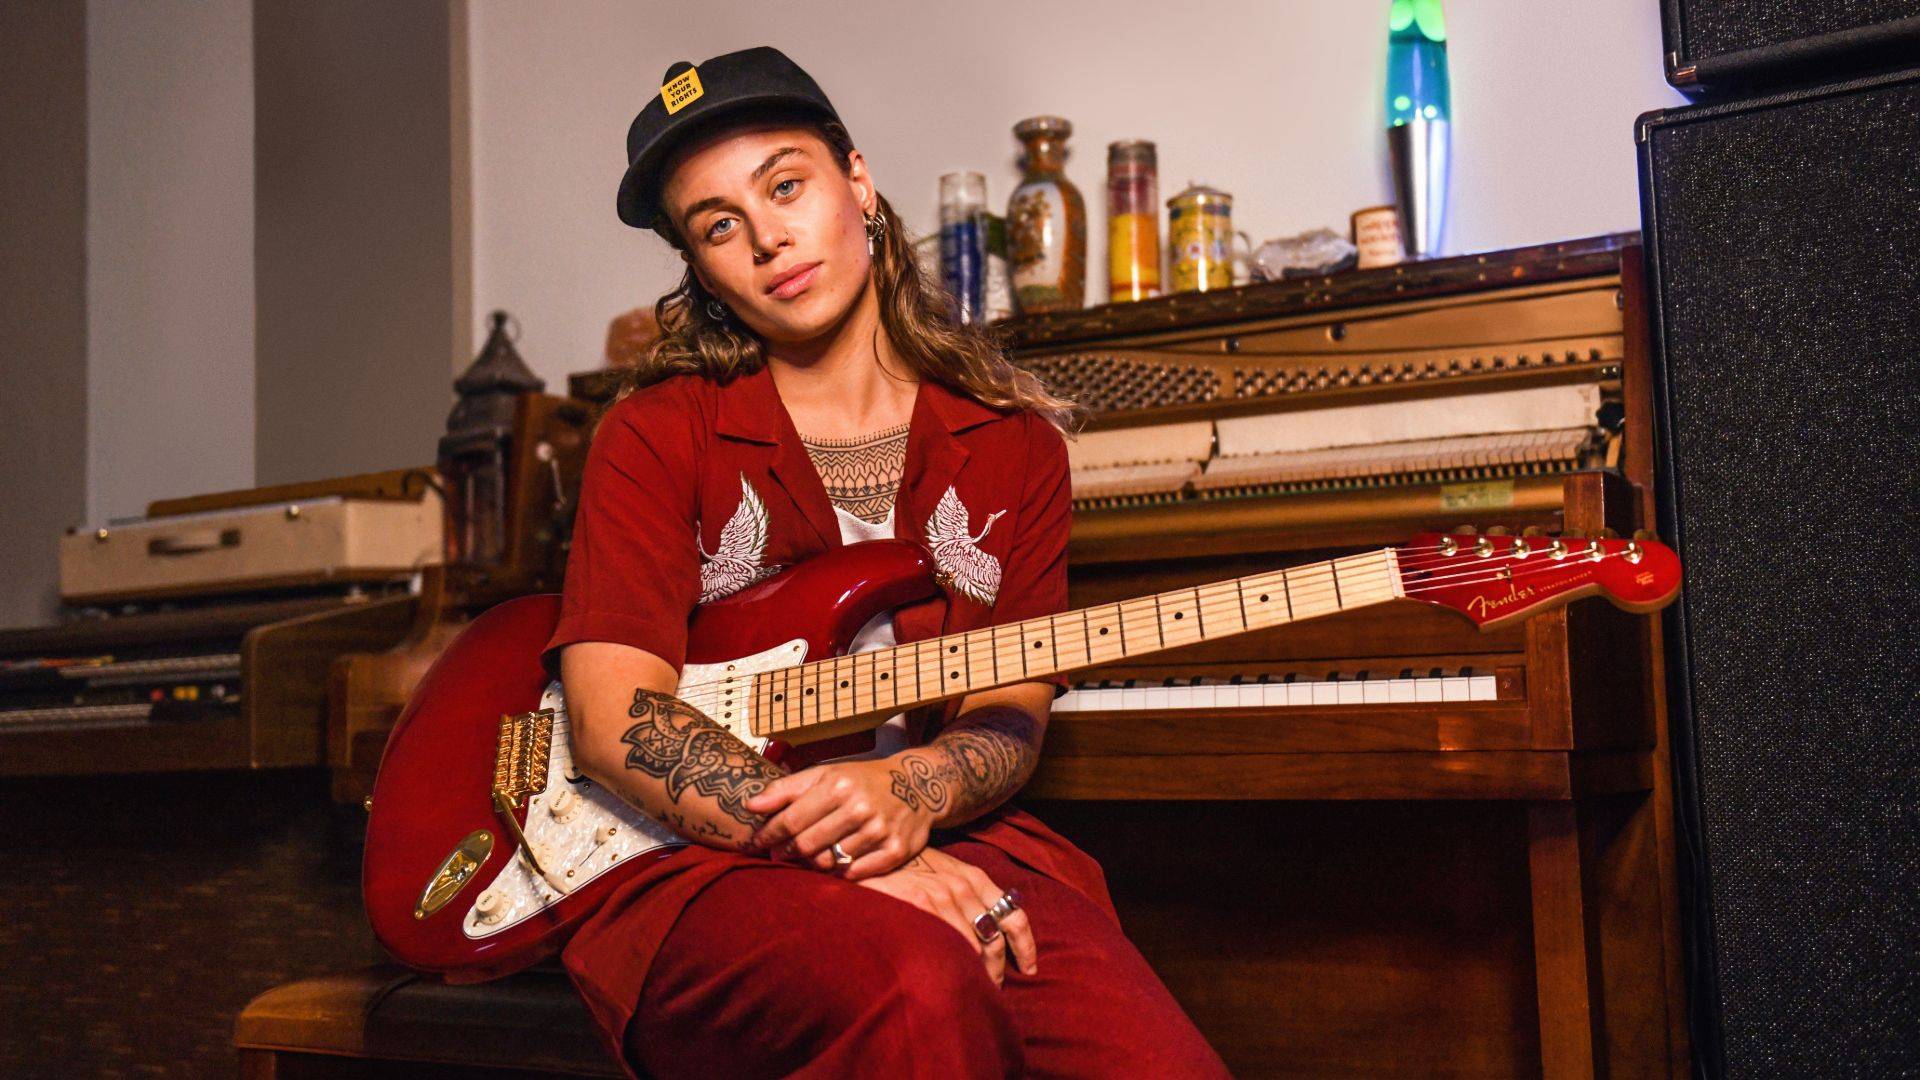 tash-sultana-in-red-suit-holds-fender-guitar-sits-over-piano-poses-for-camera